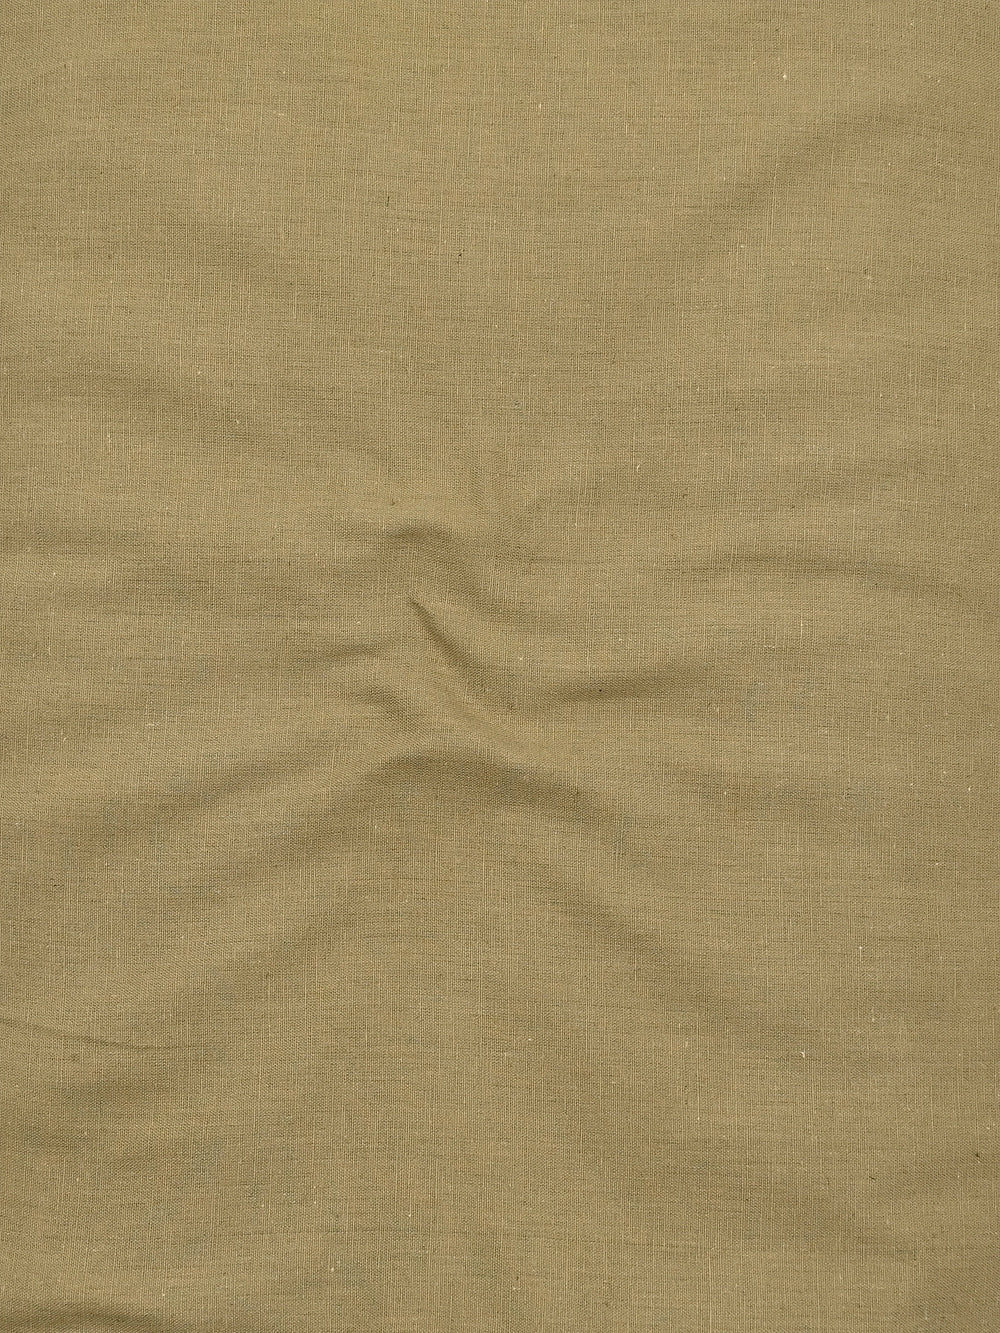 CF-102 Shade Solid Dyed Woven Cotton Flex Fabric